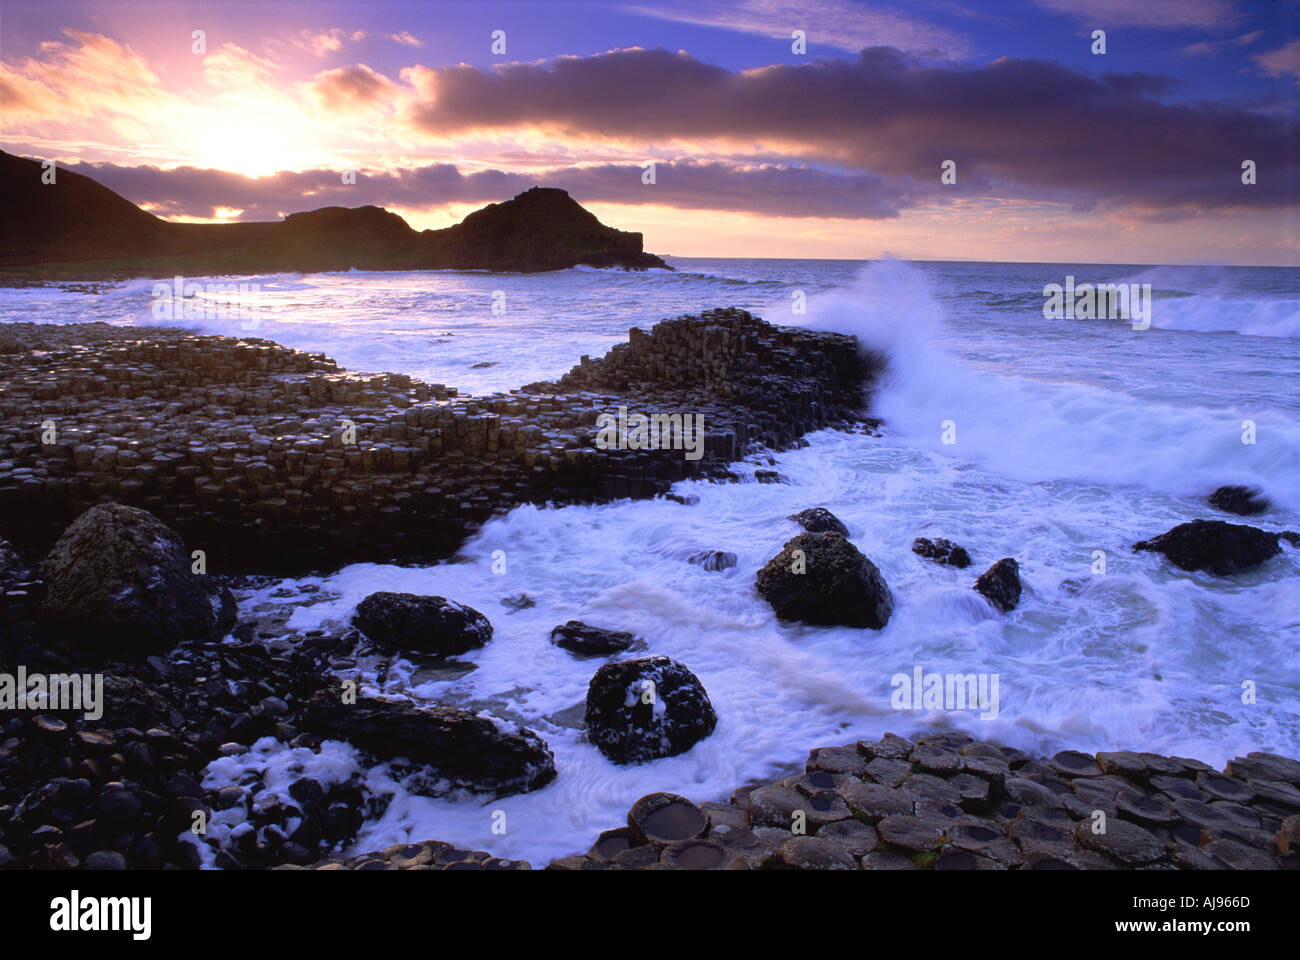 Evening at the Giants Causeway, Co Antrim, Northern Ireland Stock Photo